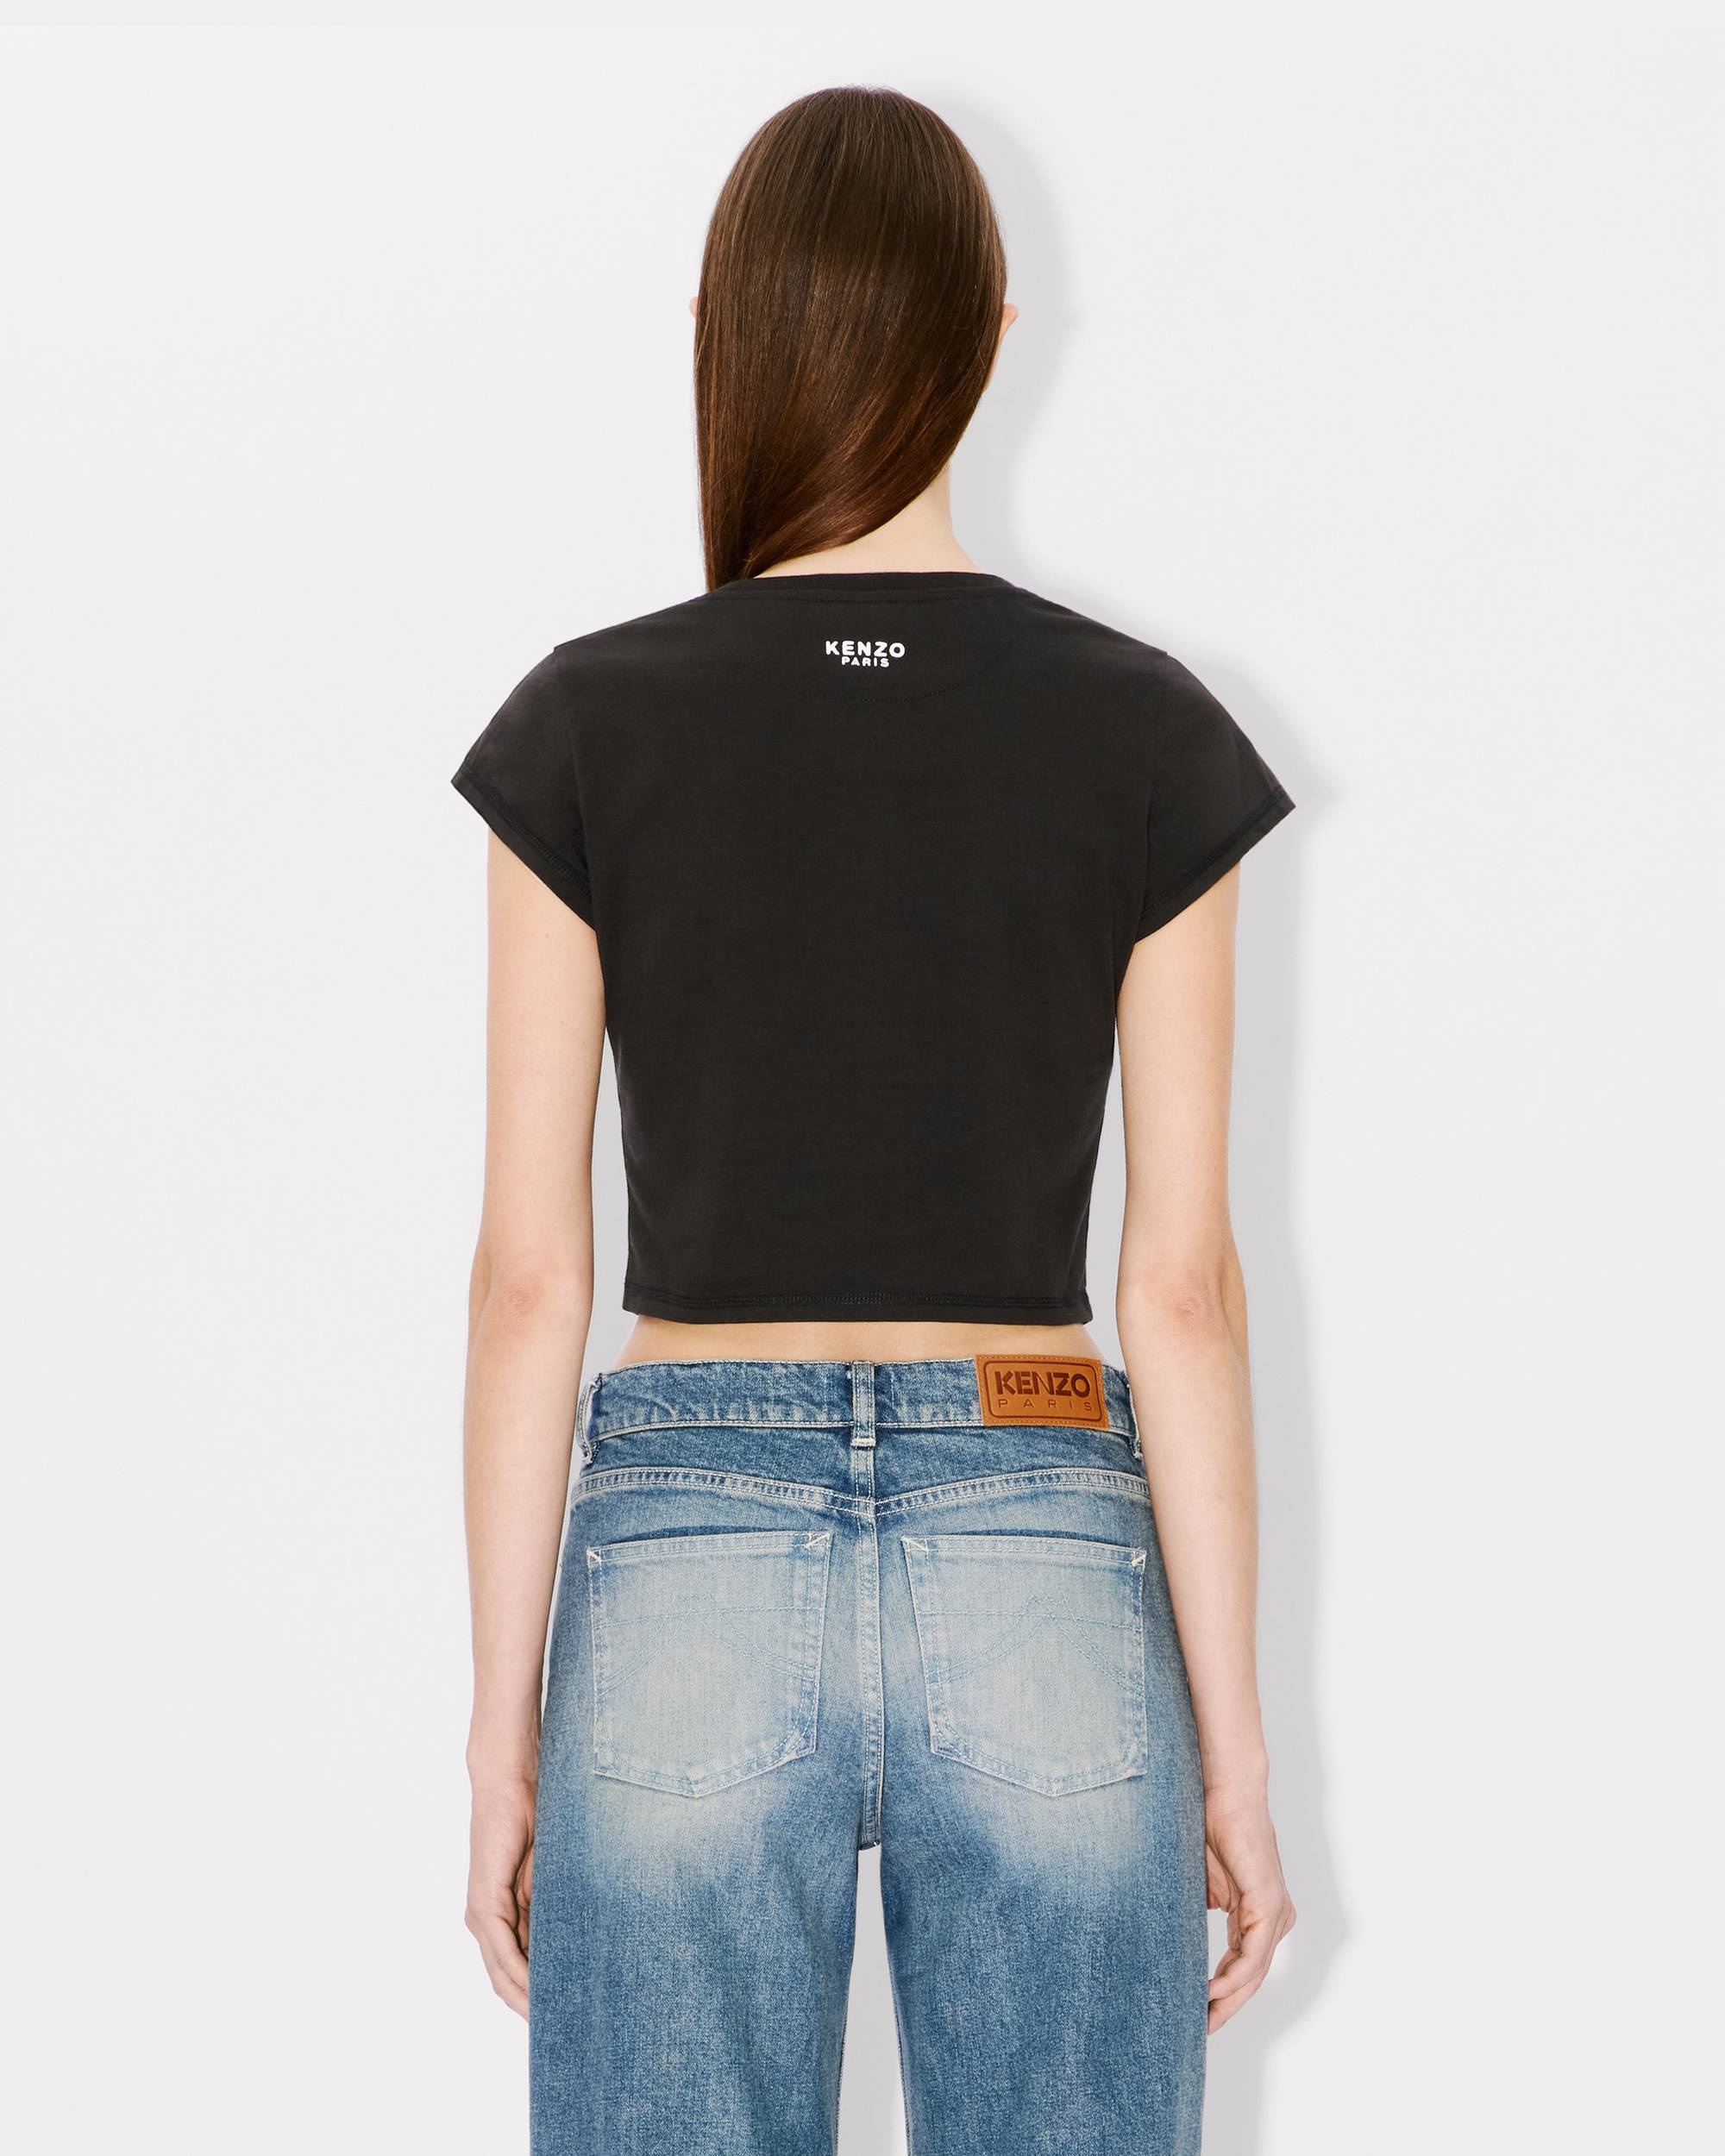 'Boke Flower' cropped embroidered T-shirt - 4